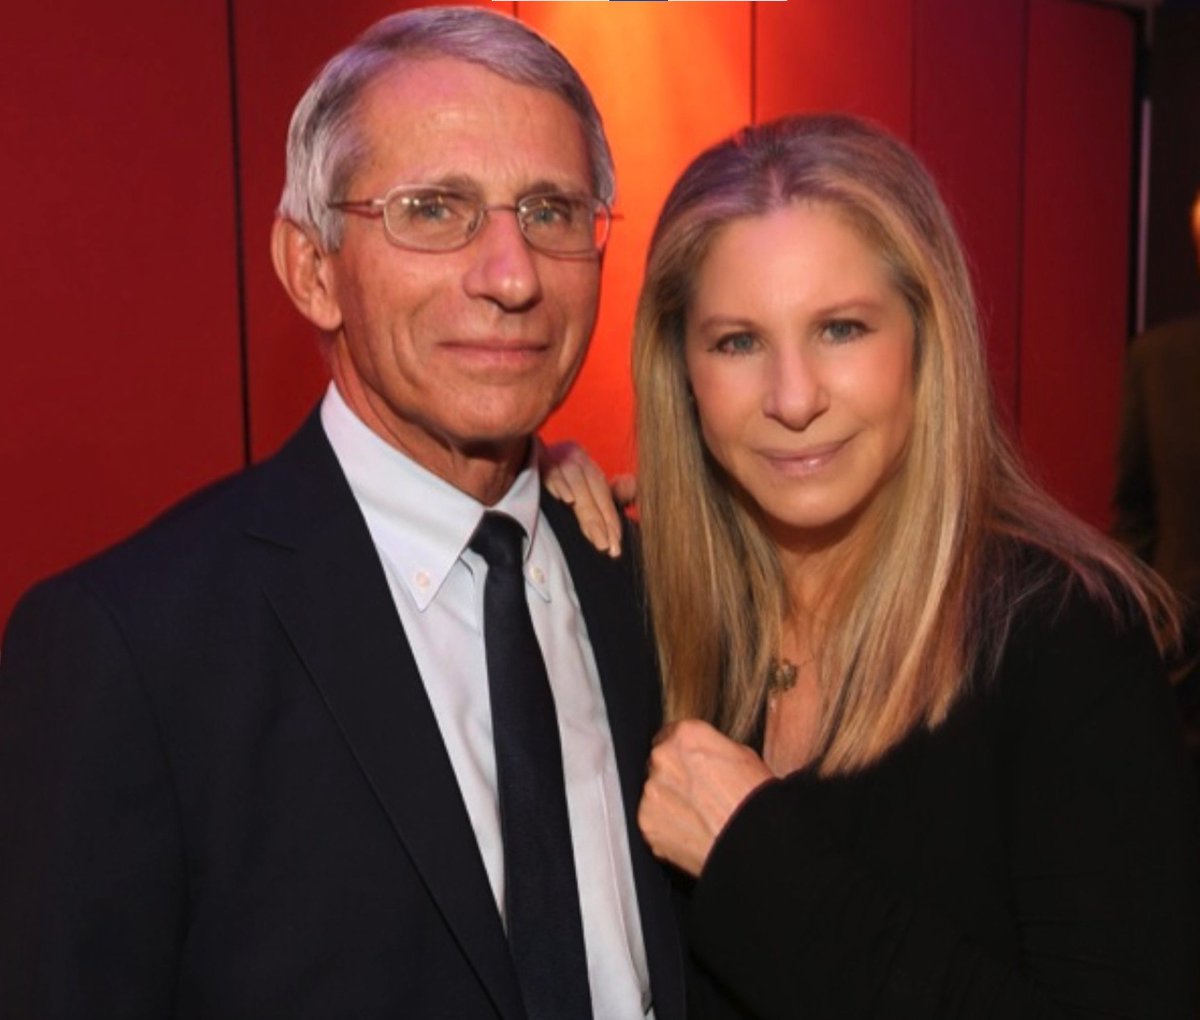 Well, with lovely help from  @kevsessums, we were able to reach Ms. Streisand, and she generously agreed to add some special surprises to our surprise Zoom, starting with a four-minute personalized message to Tony (which was wonderfully political about his current boss). /7